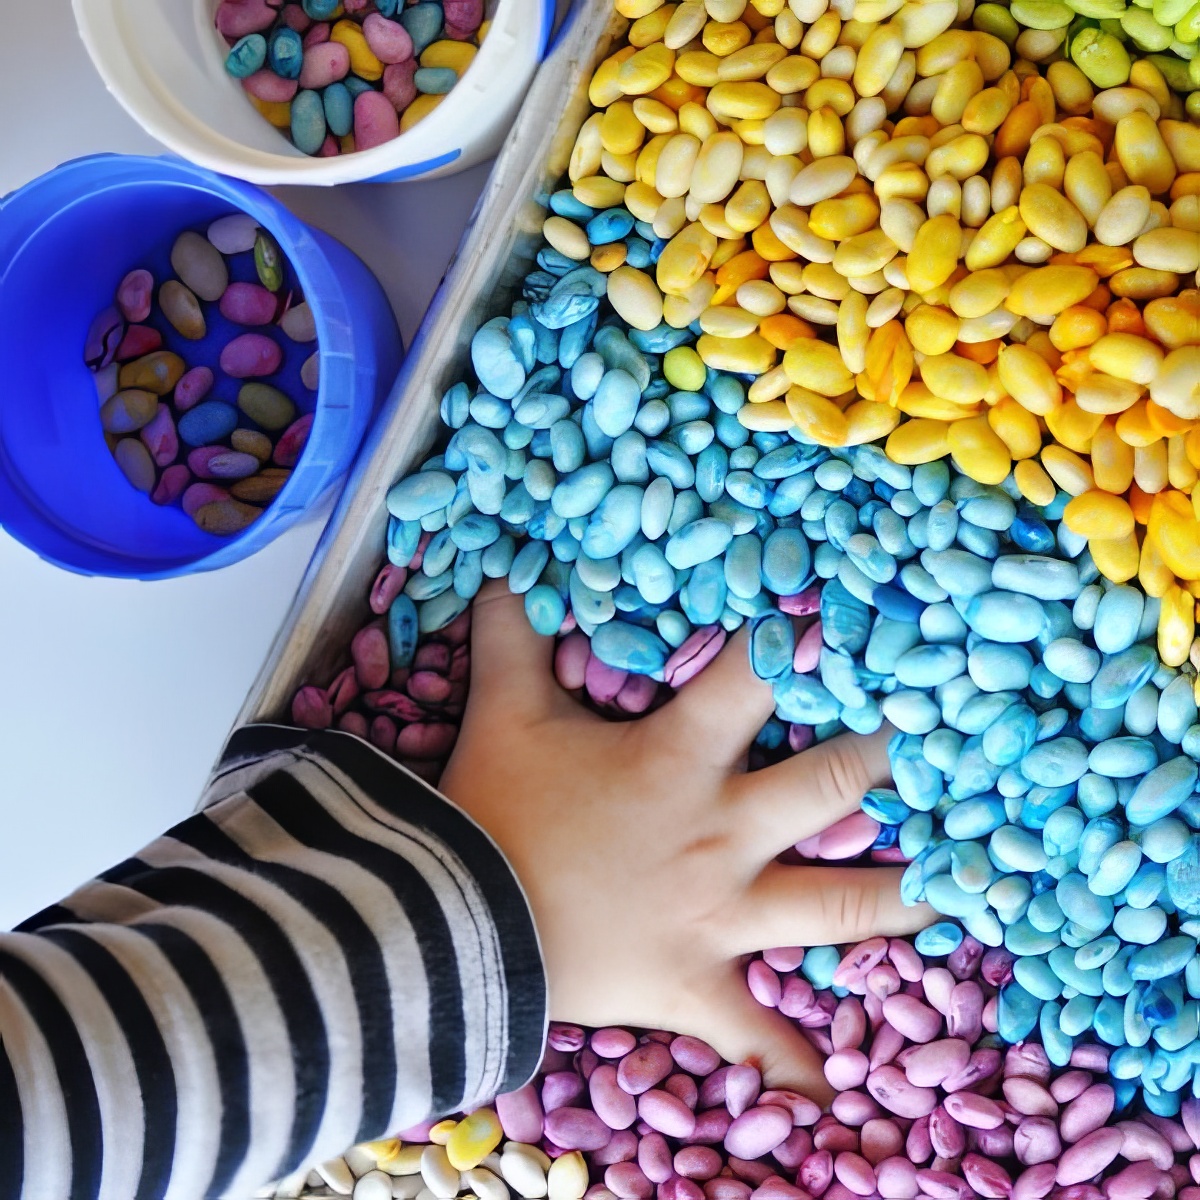 scented rainbow beans as sensory bins for preschoolers - dyed beans in a plastic bin